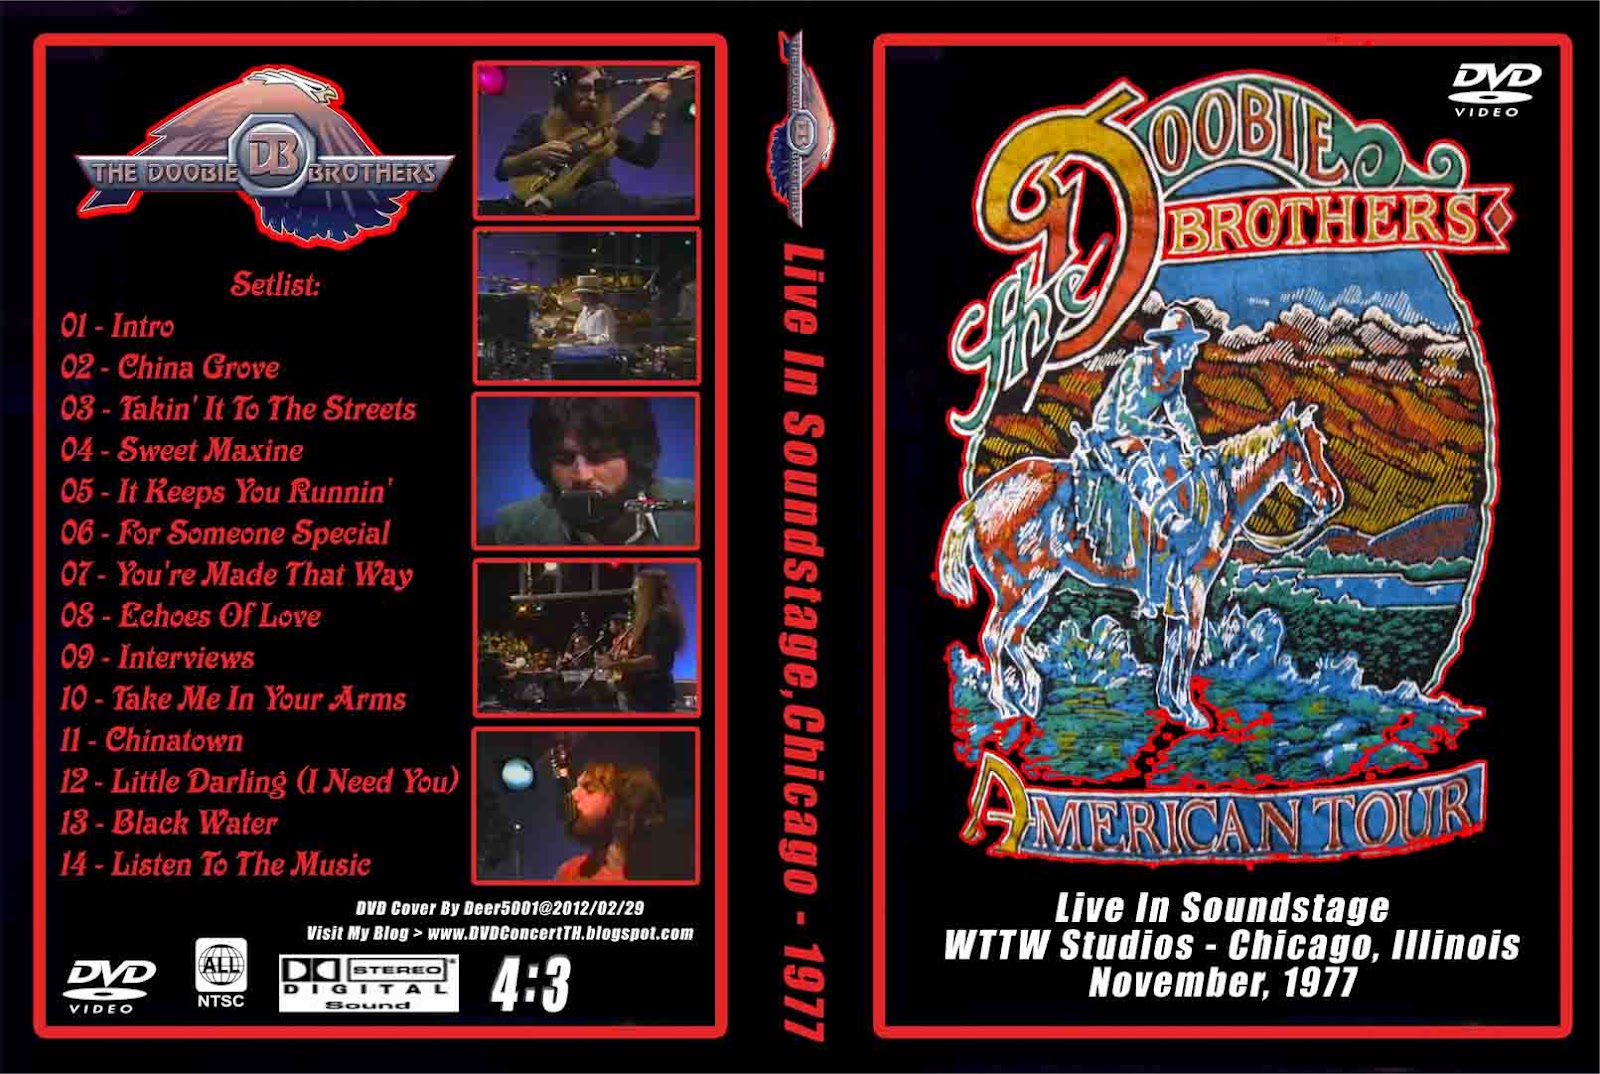 DVD Concert TH Power By Deer 5001: The Doobie Brothers - 1977 - Live In Soundstage1600 x 1074